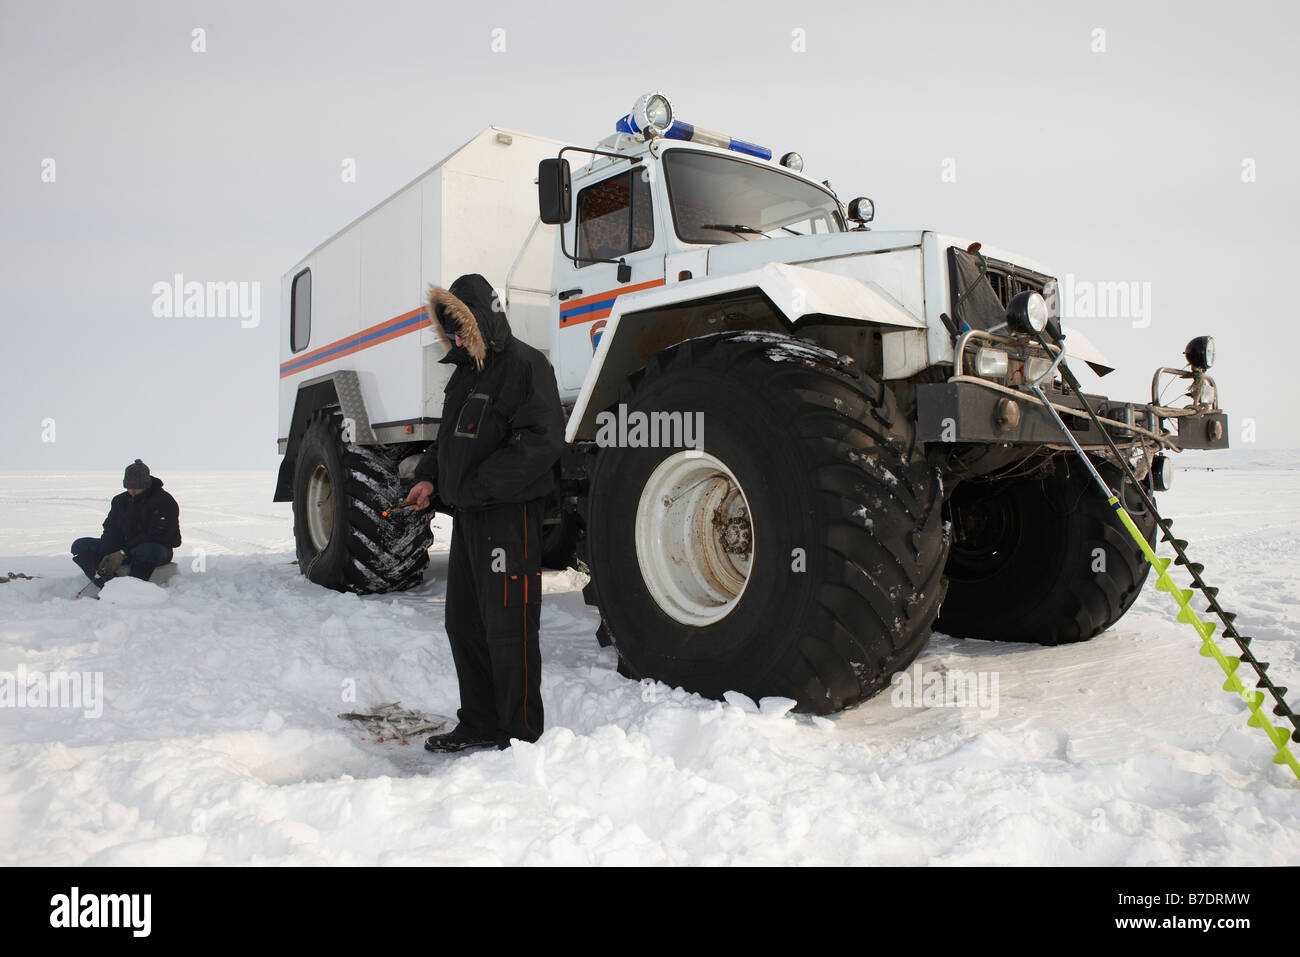 Ice fishing for smelts in front of modified truck,  Anadyr Chukotka, Siberia Russia Stock Photo